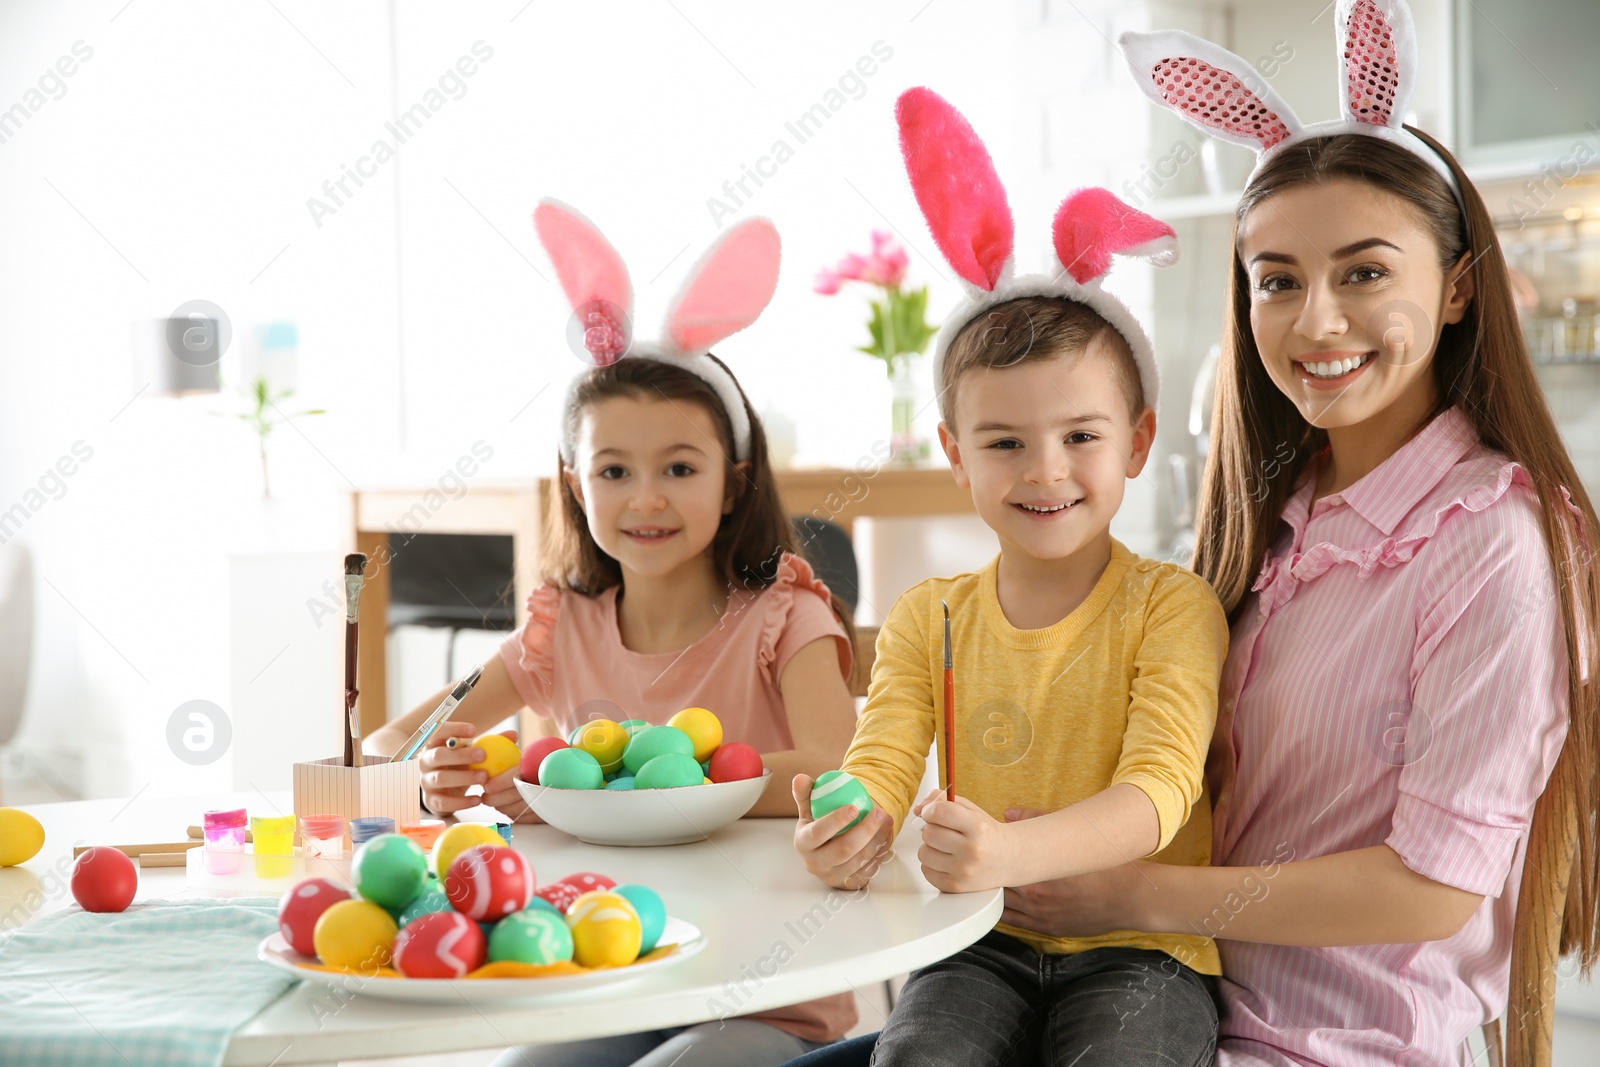 Photo of Mother and her children with bunny ears headbands painting Easter eggs in kitchen, space for text